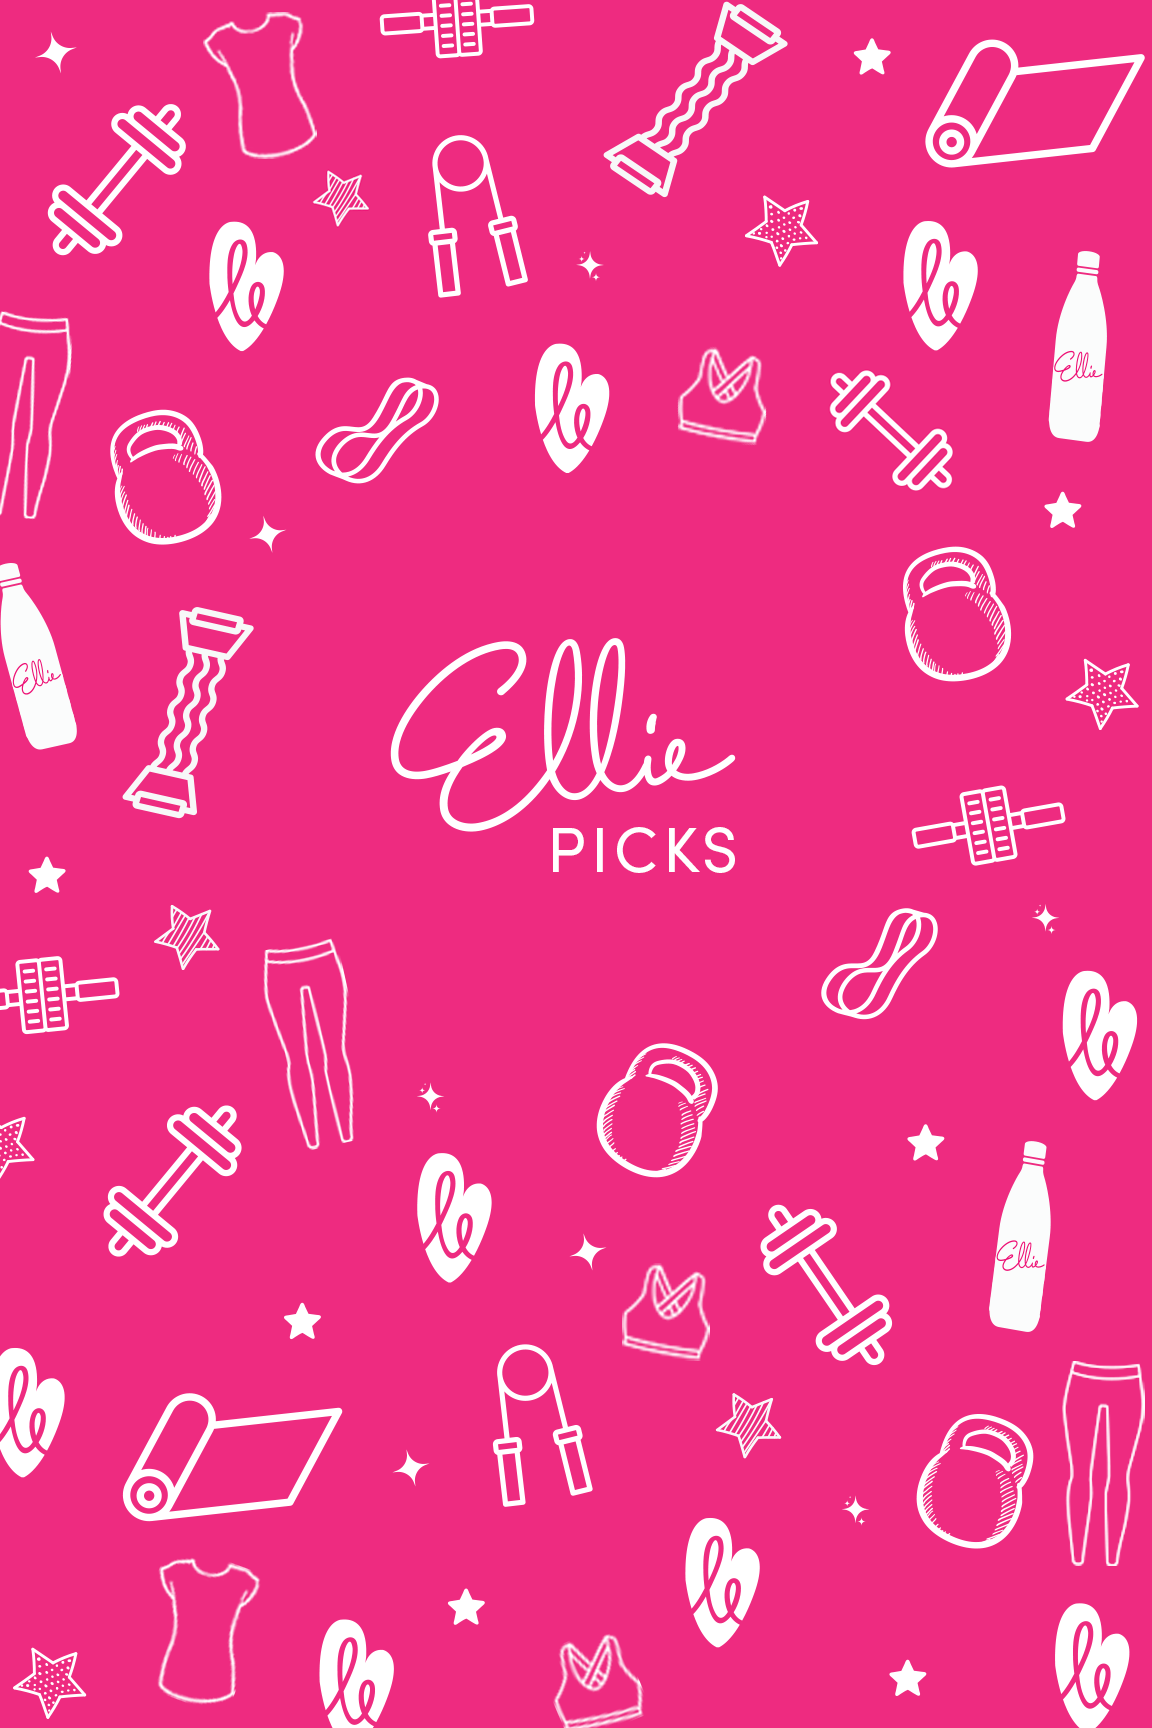 Ellie Picks - One Time Purchase